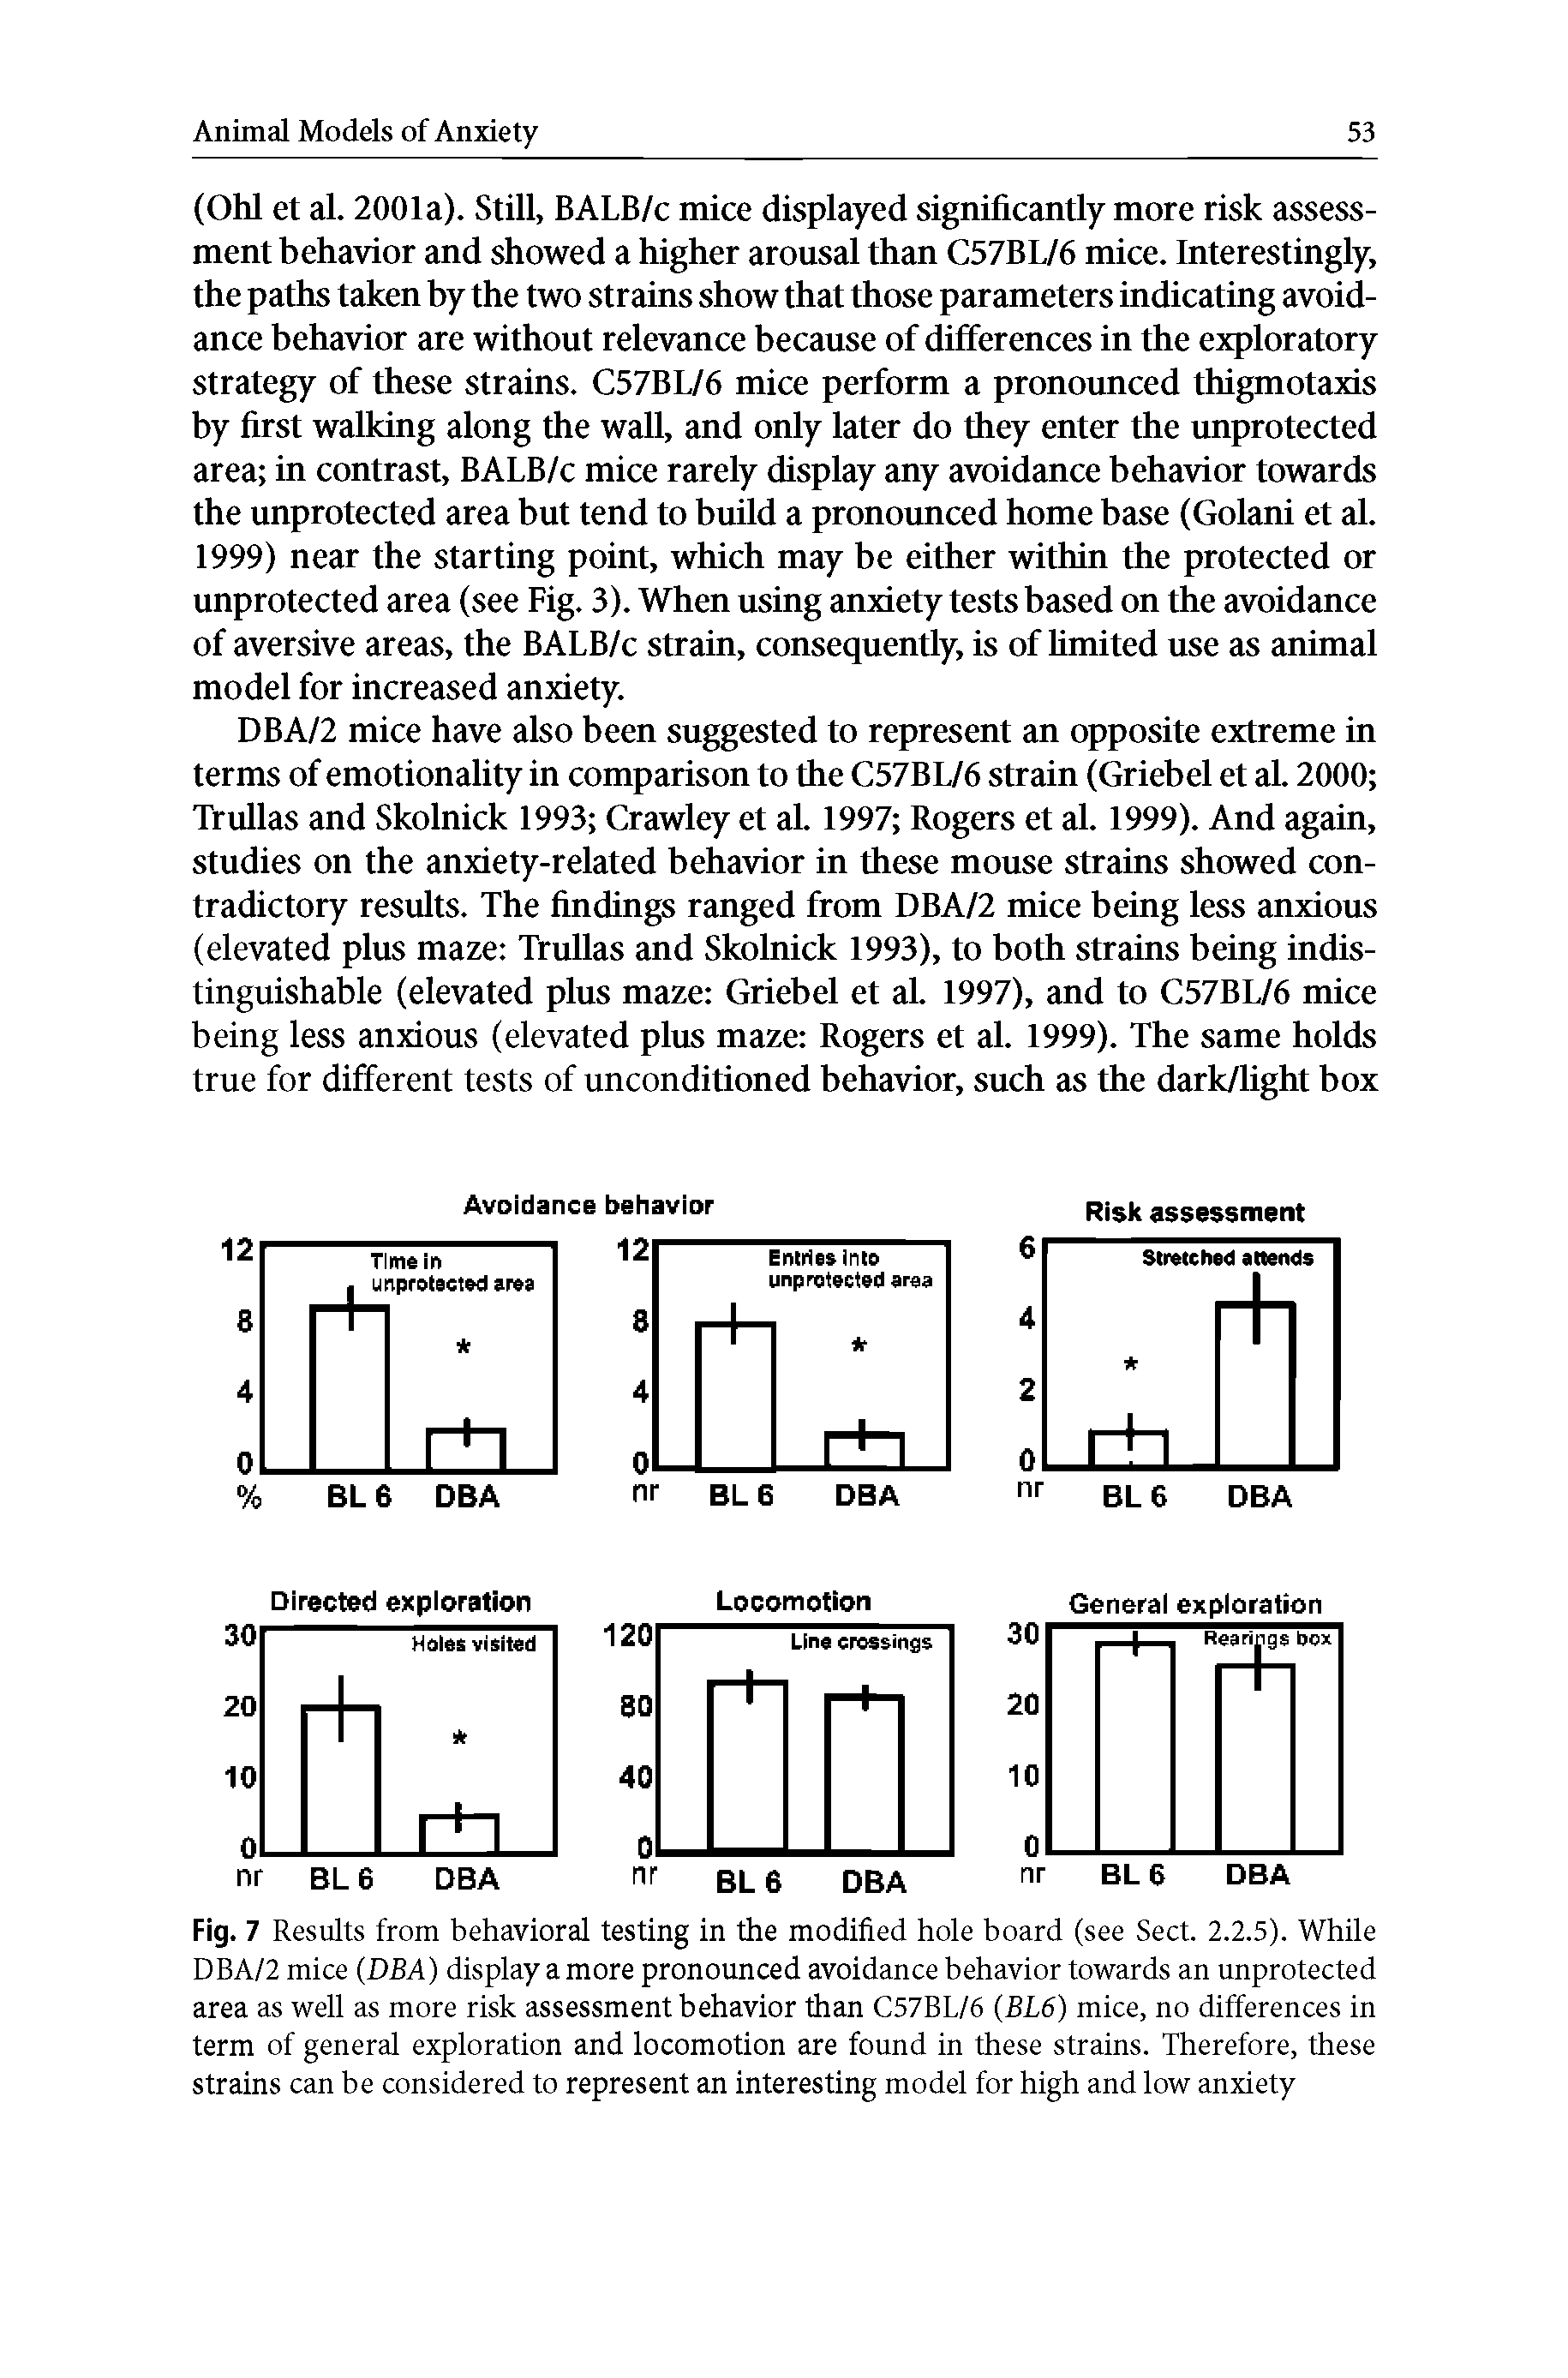 Fig. 7 Results from behavioral testing in the modified hole board (see Sect. 2.2.5). While DBA/2 mice (DBA) display a more pronounced avoidance behavior towards an unprotected area as well as more risk assessment behavior than C57BL/6 (BL6) mice, no differences in term of general exploration and locomotion are found in these strains. Therefore, these strains can be considered to represent an interesting model for high and low anxiety...